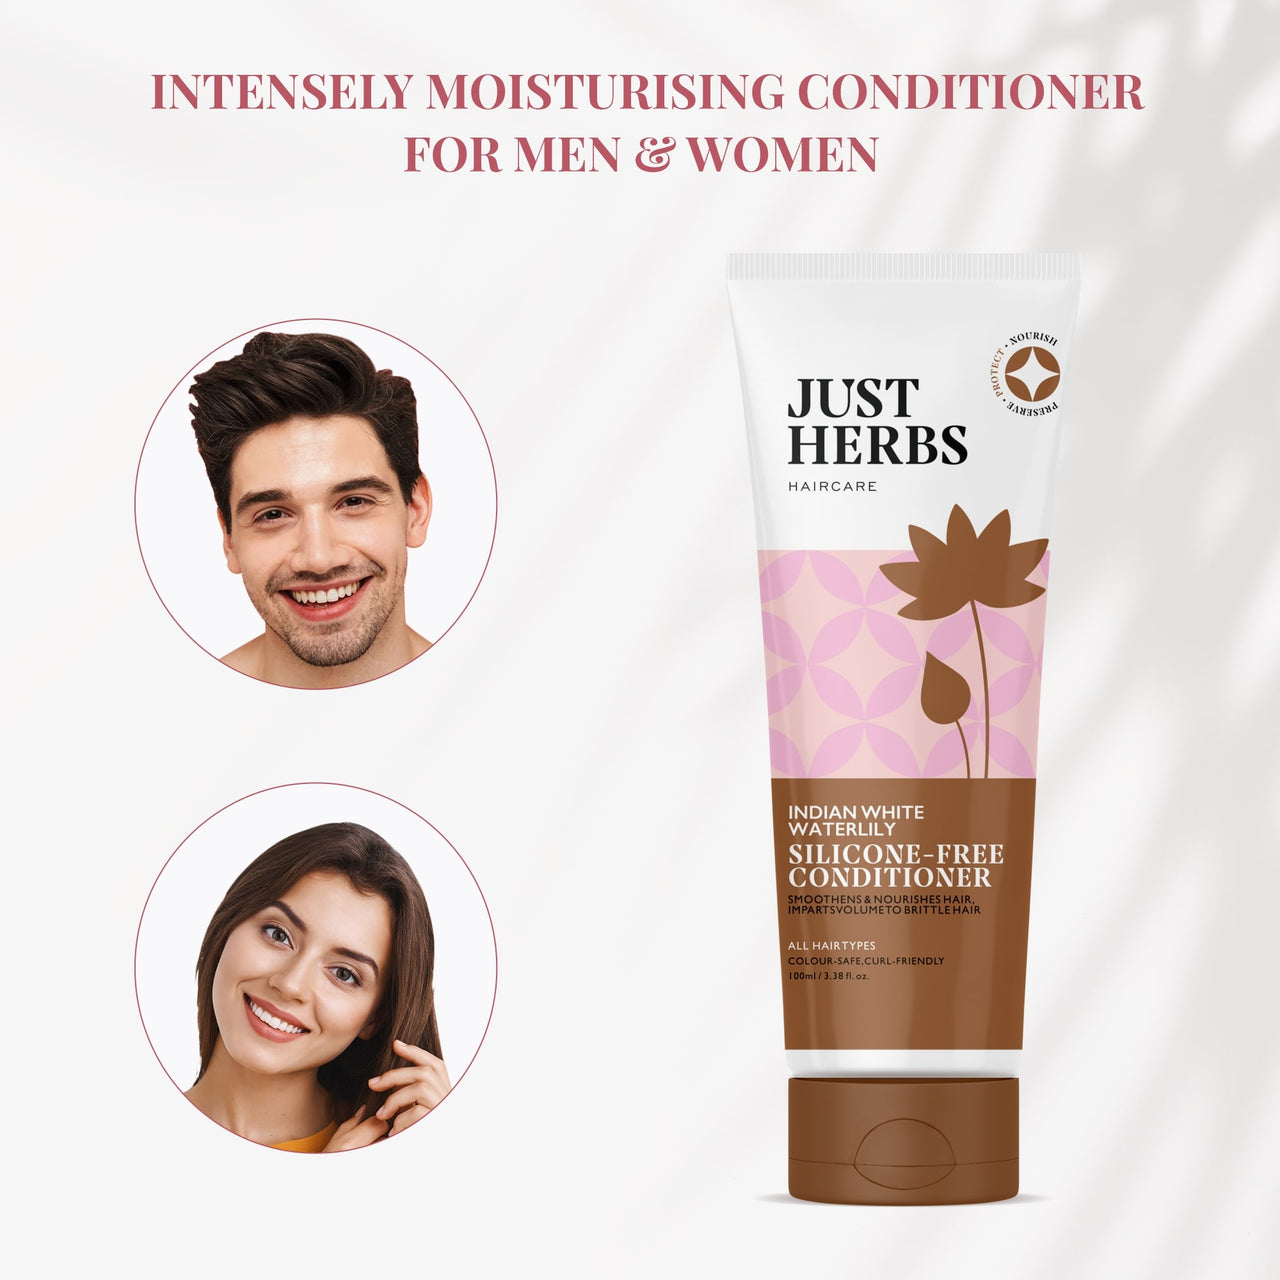 Silicone-free Conditioner with Indian White Waterlily